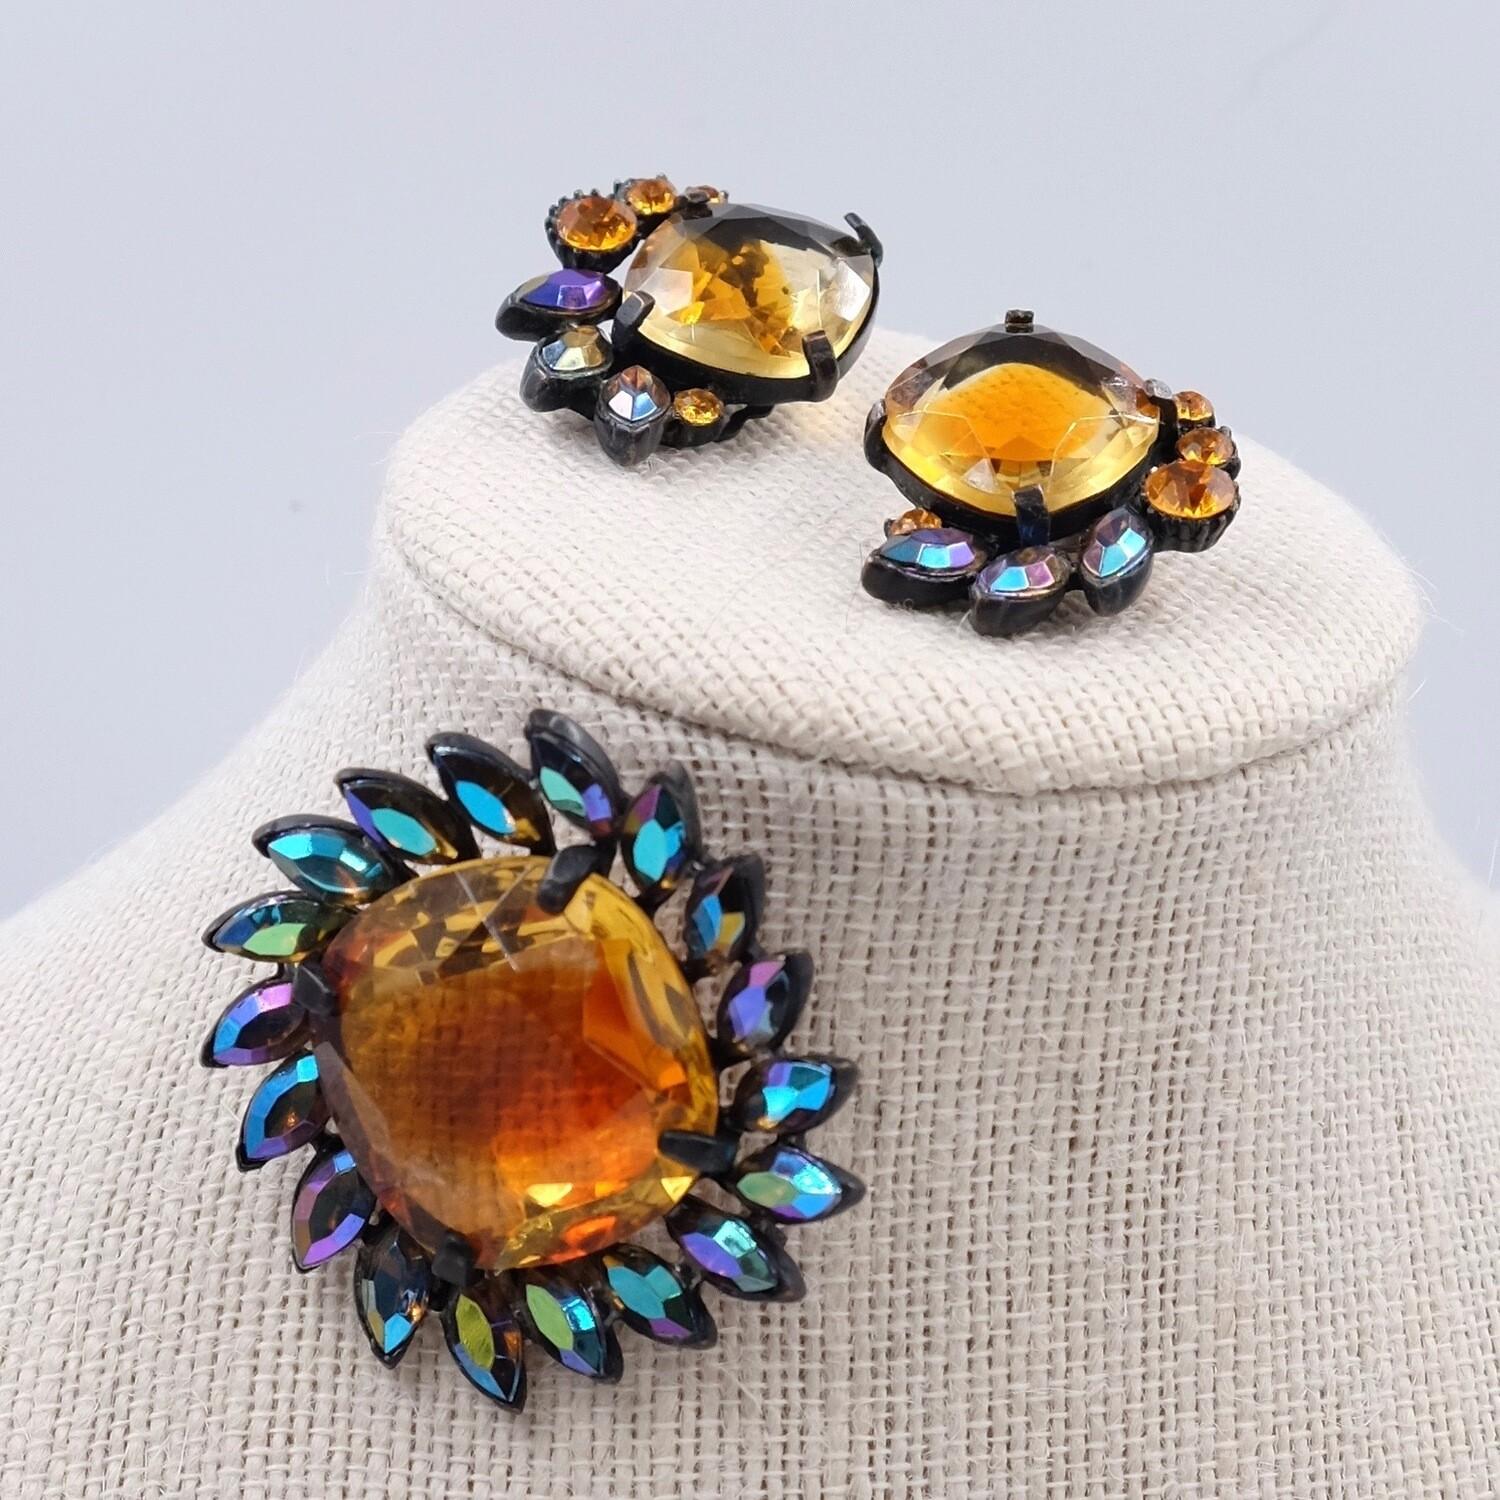 Year: 1950
Hallmark: Claudette
Dimensions: brooch H 1.96 in, clip-on earrings D 1.18 in
Materials: base metal, glass